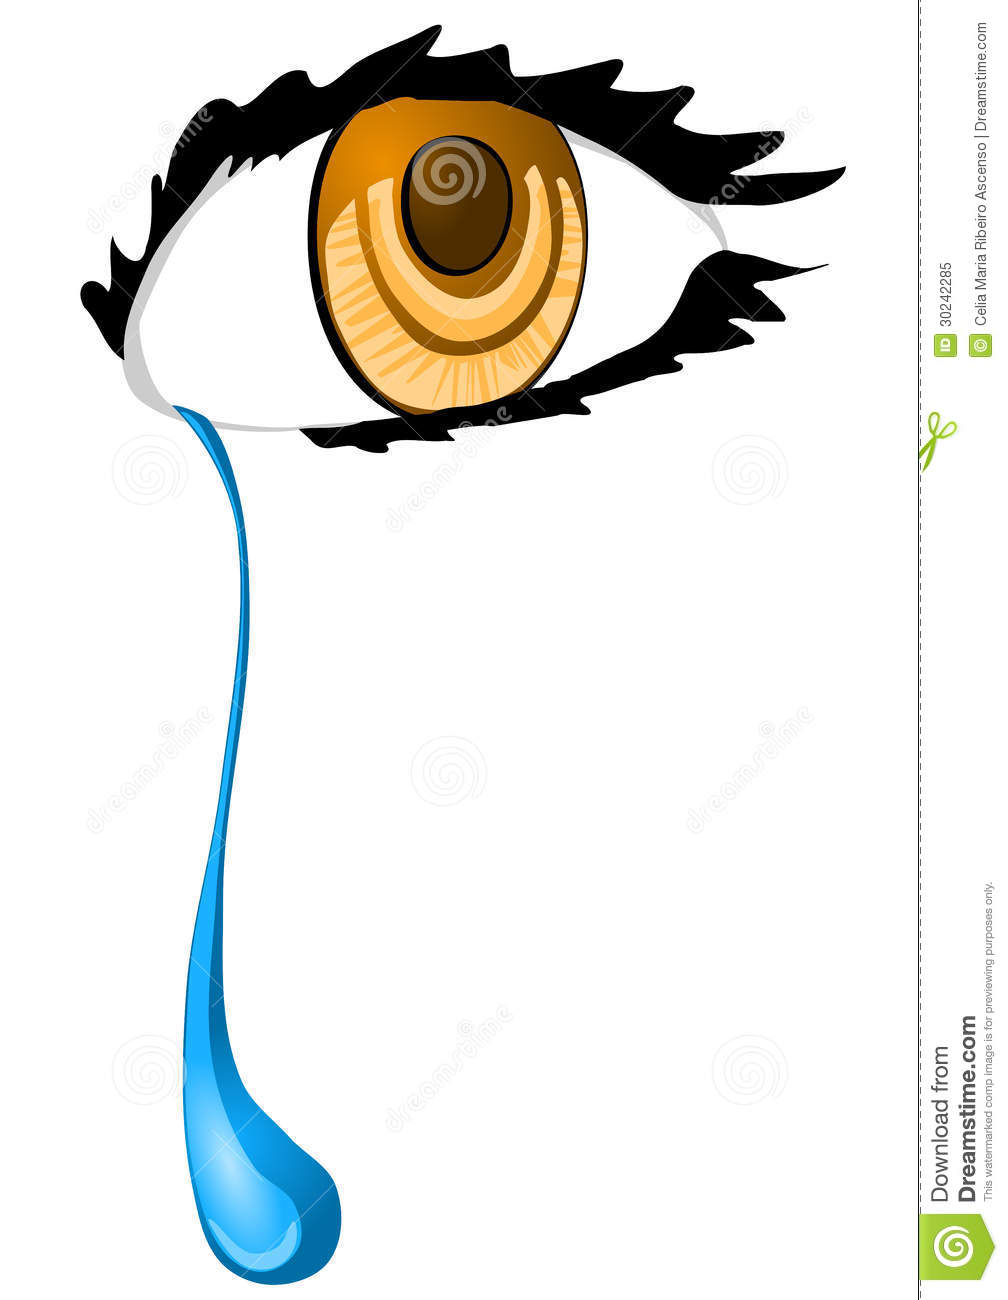 Crying Eye With A Tear Drop 